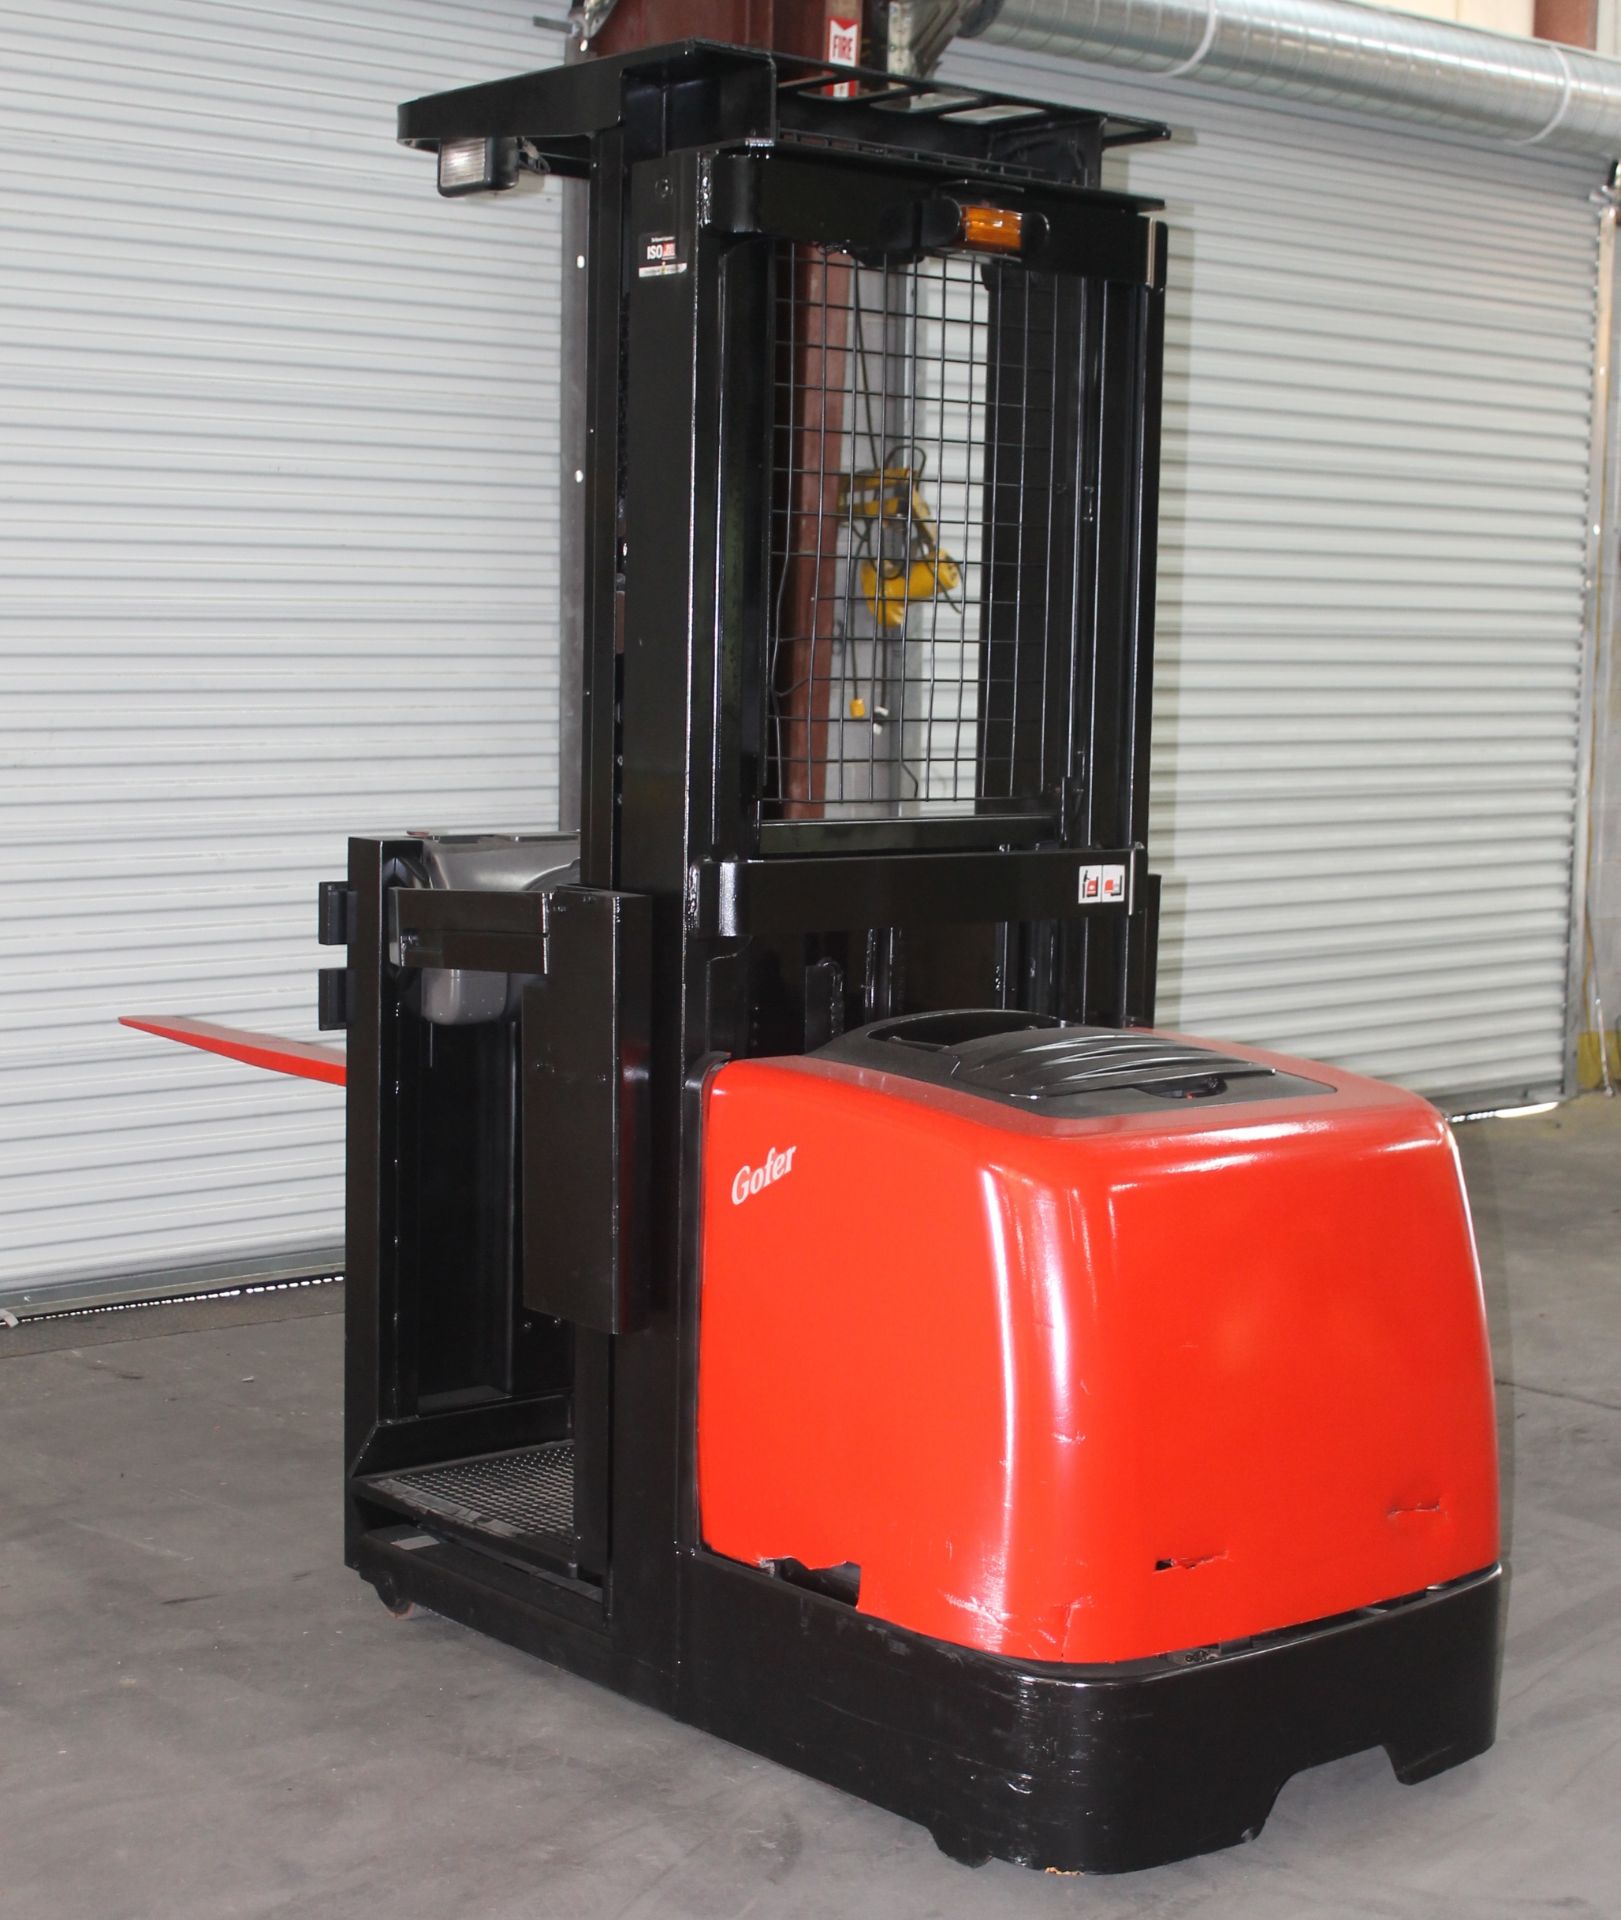 2003 RAYMOND ORDER PICKER WITH ERGO LIFT / MINI MAST FEATURE, CLICK HERE TO WATCH VIDEO - Image 7 of 8